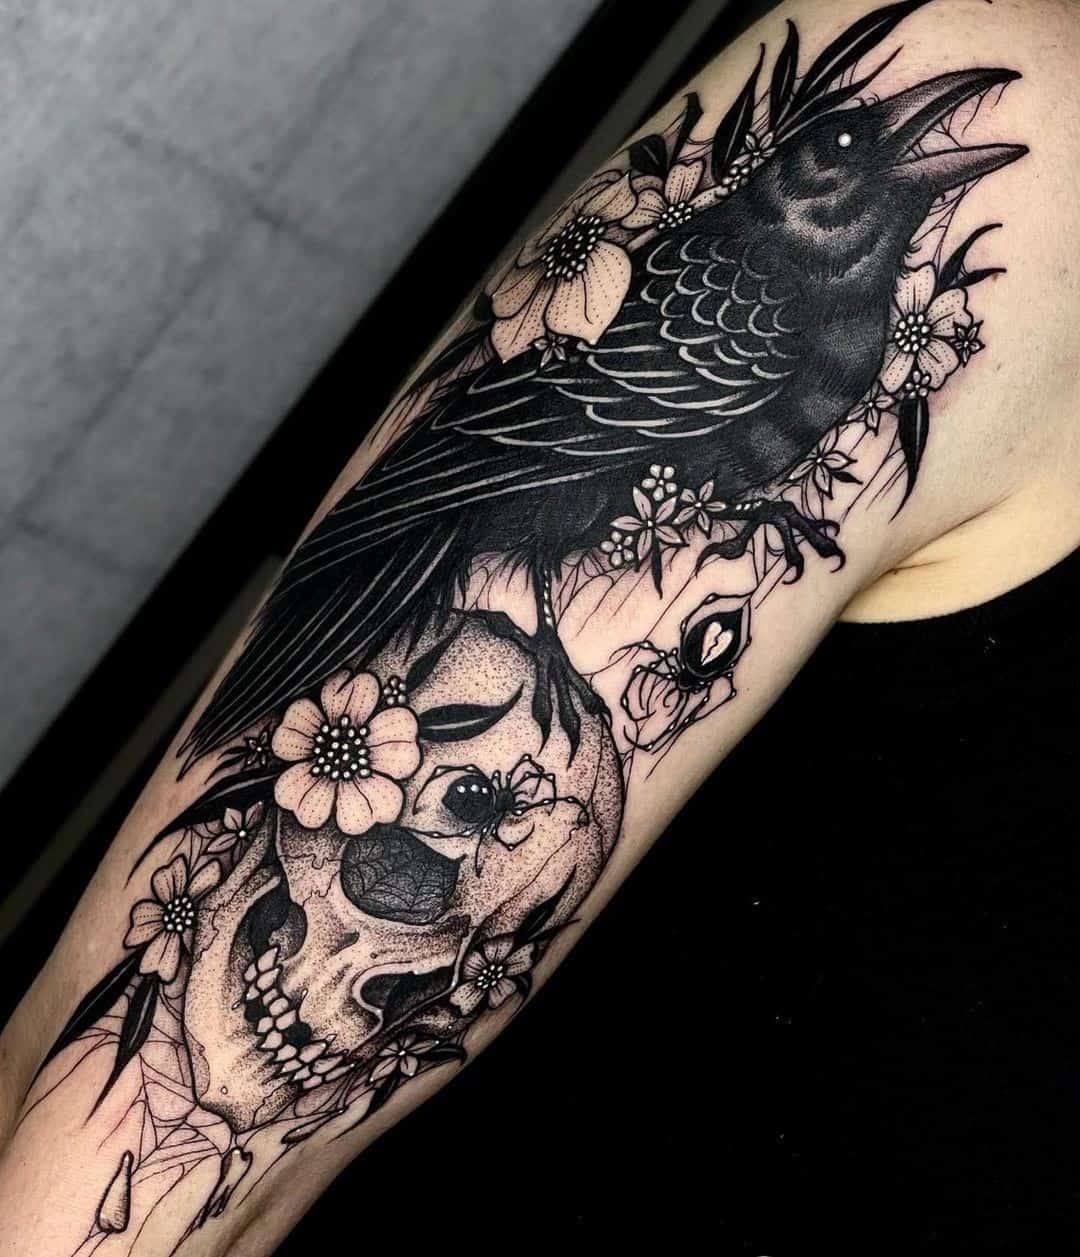 Evil Crow Tattoo Design With Flower Details 